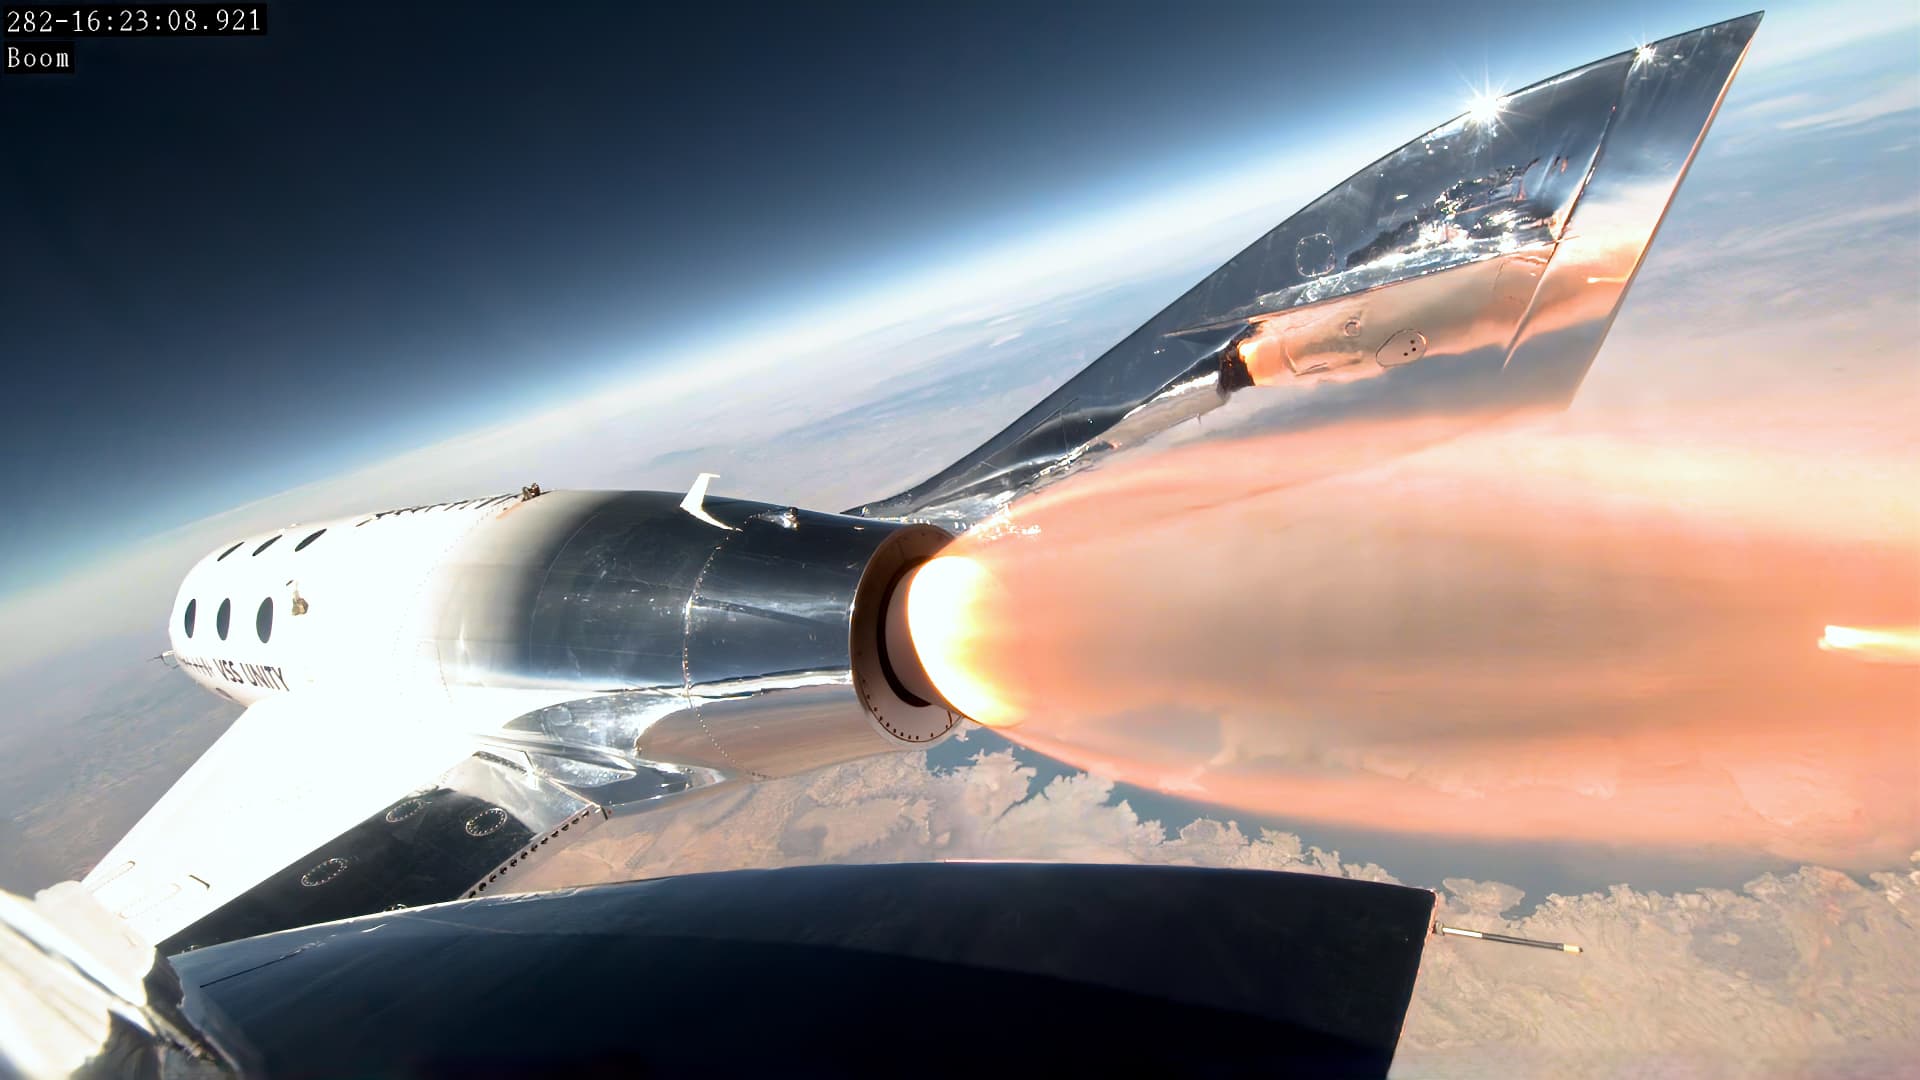 Virgin Galactic sets first commercial space tourism flight